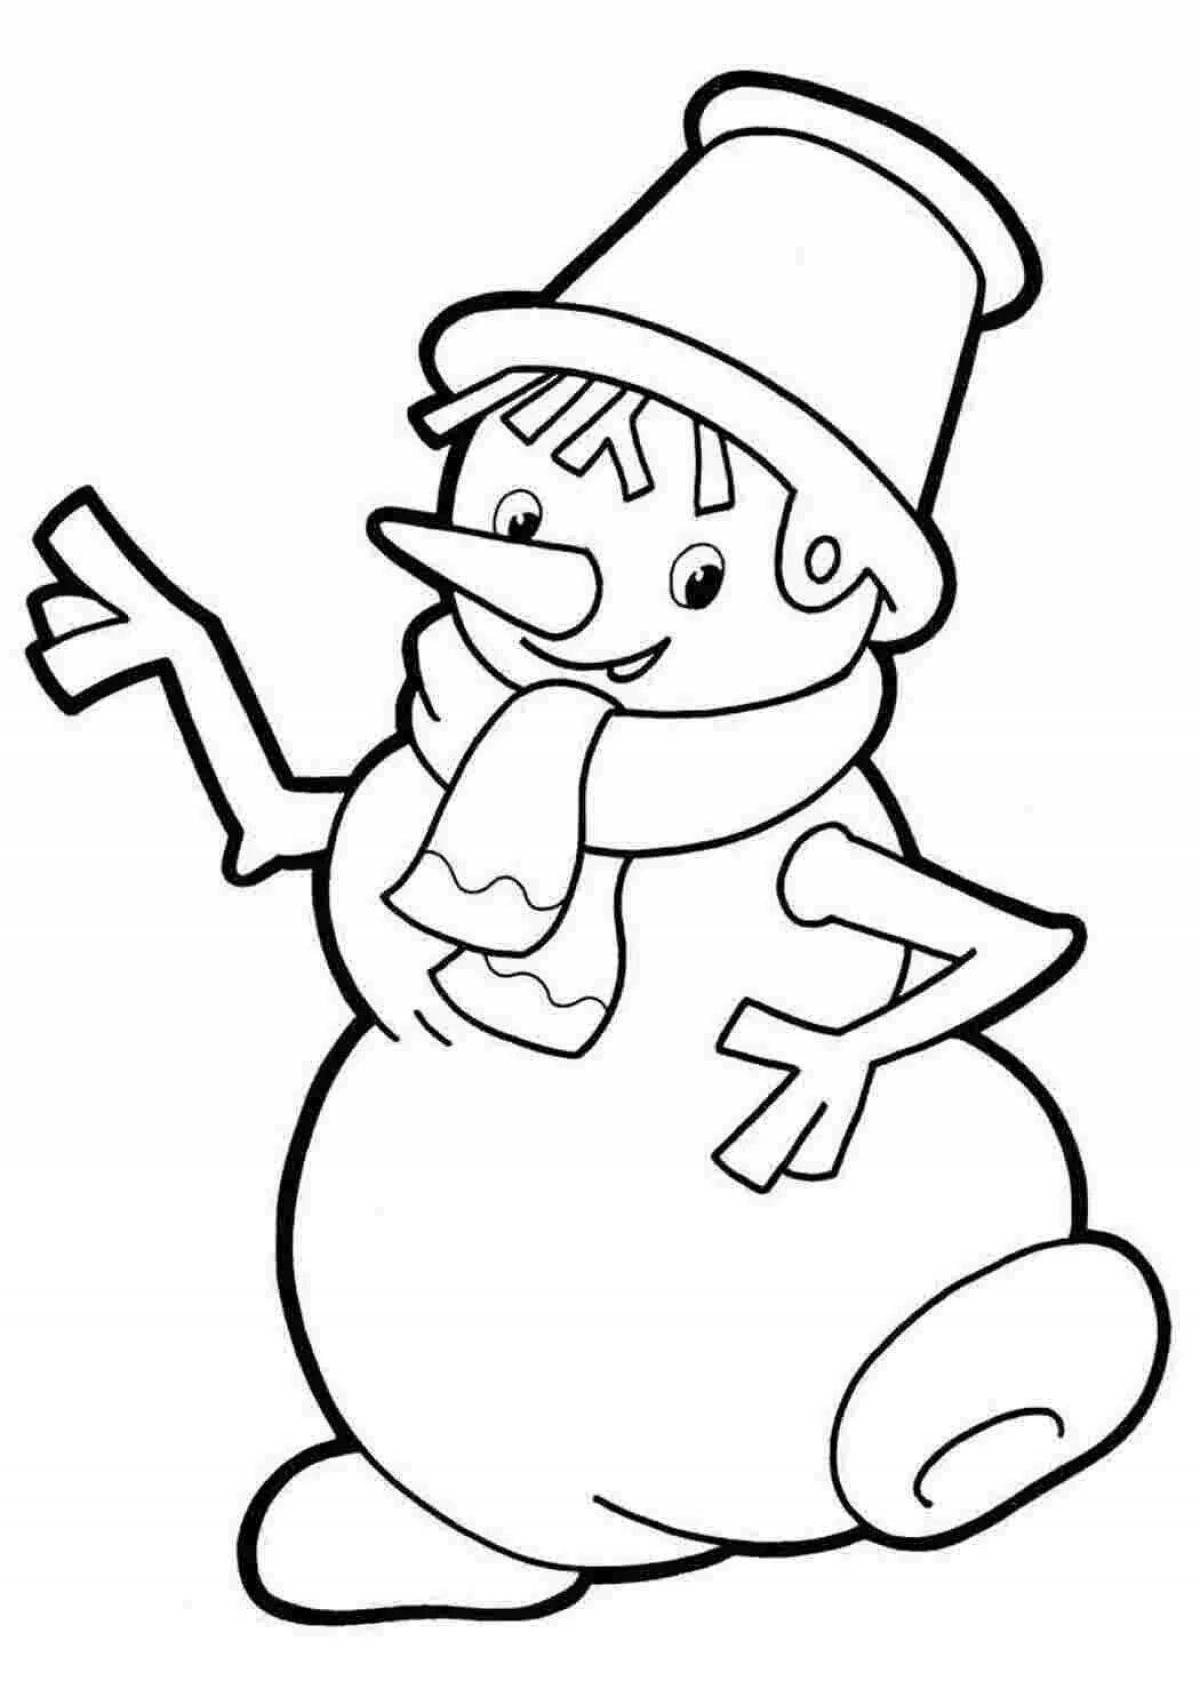 Whimsical children's coloring snowman